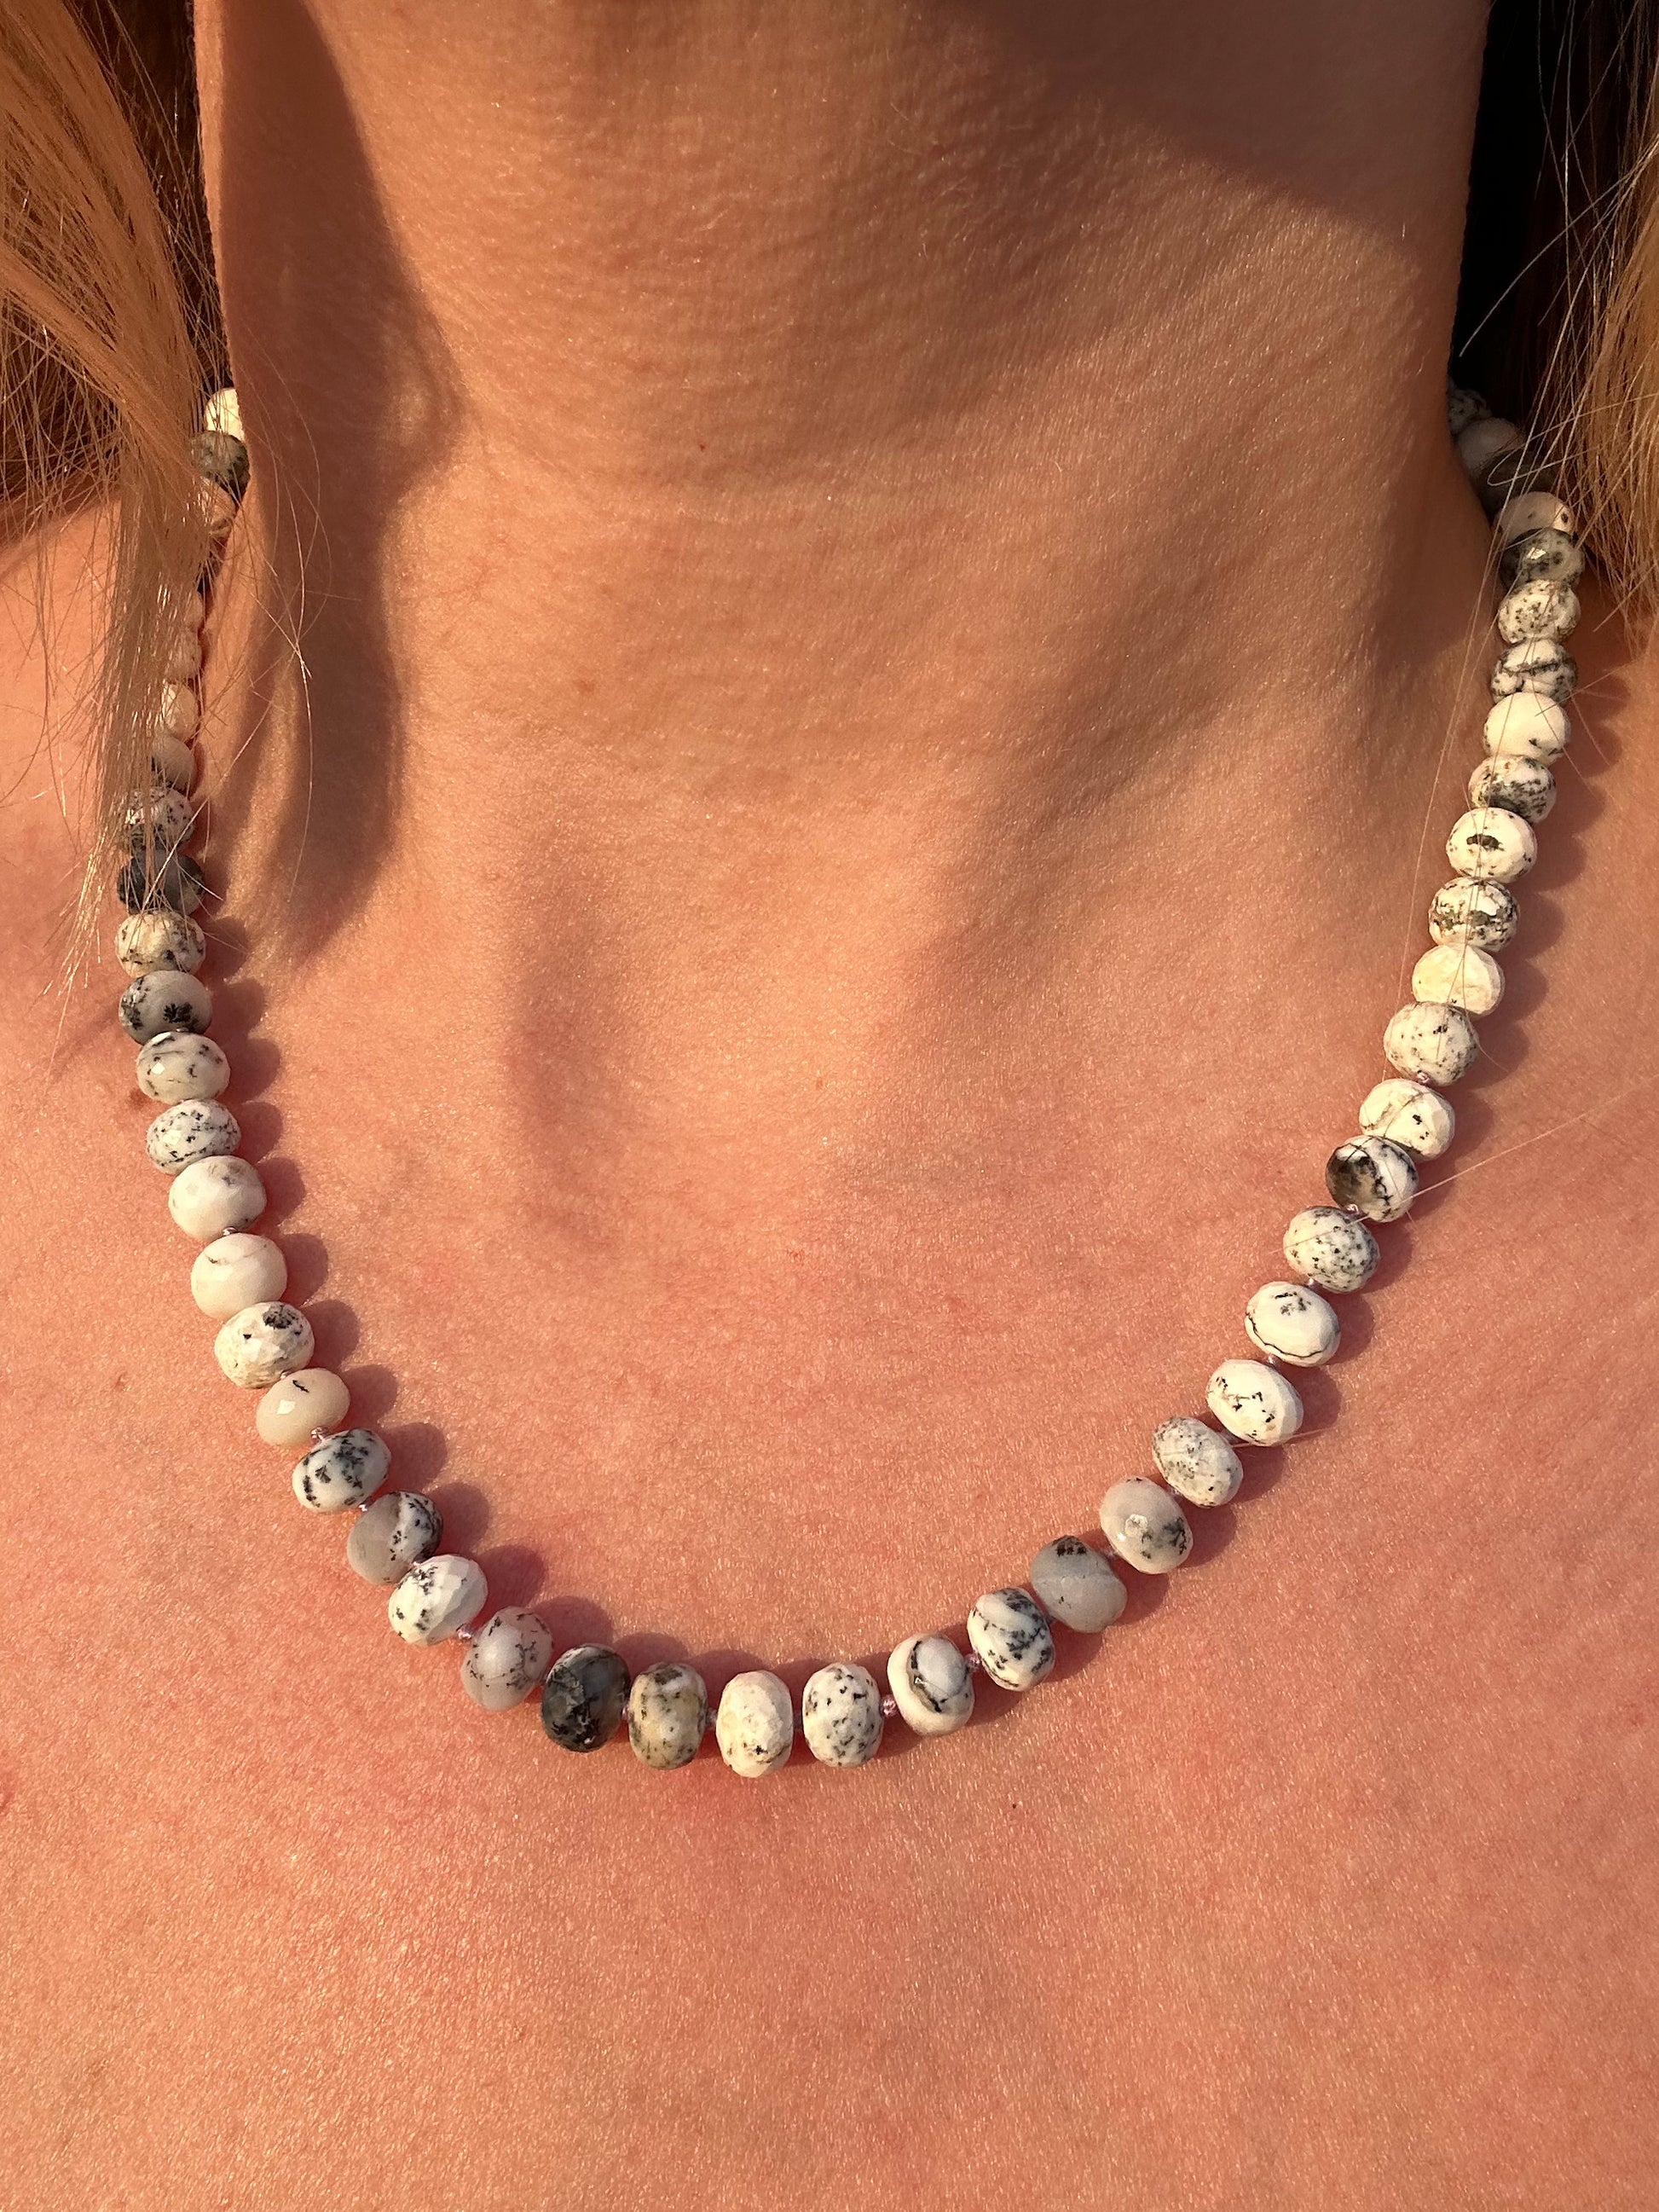 dendritic opal knotted beads beaded candy necklace strand